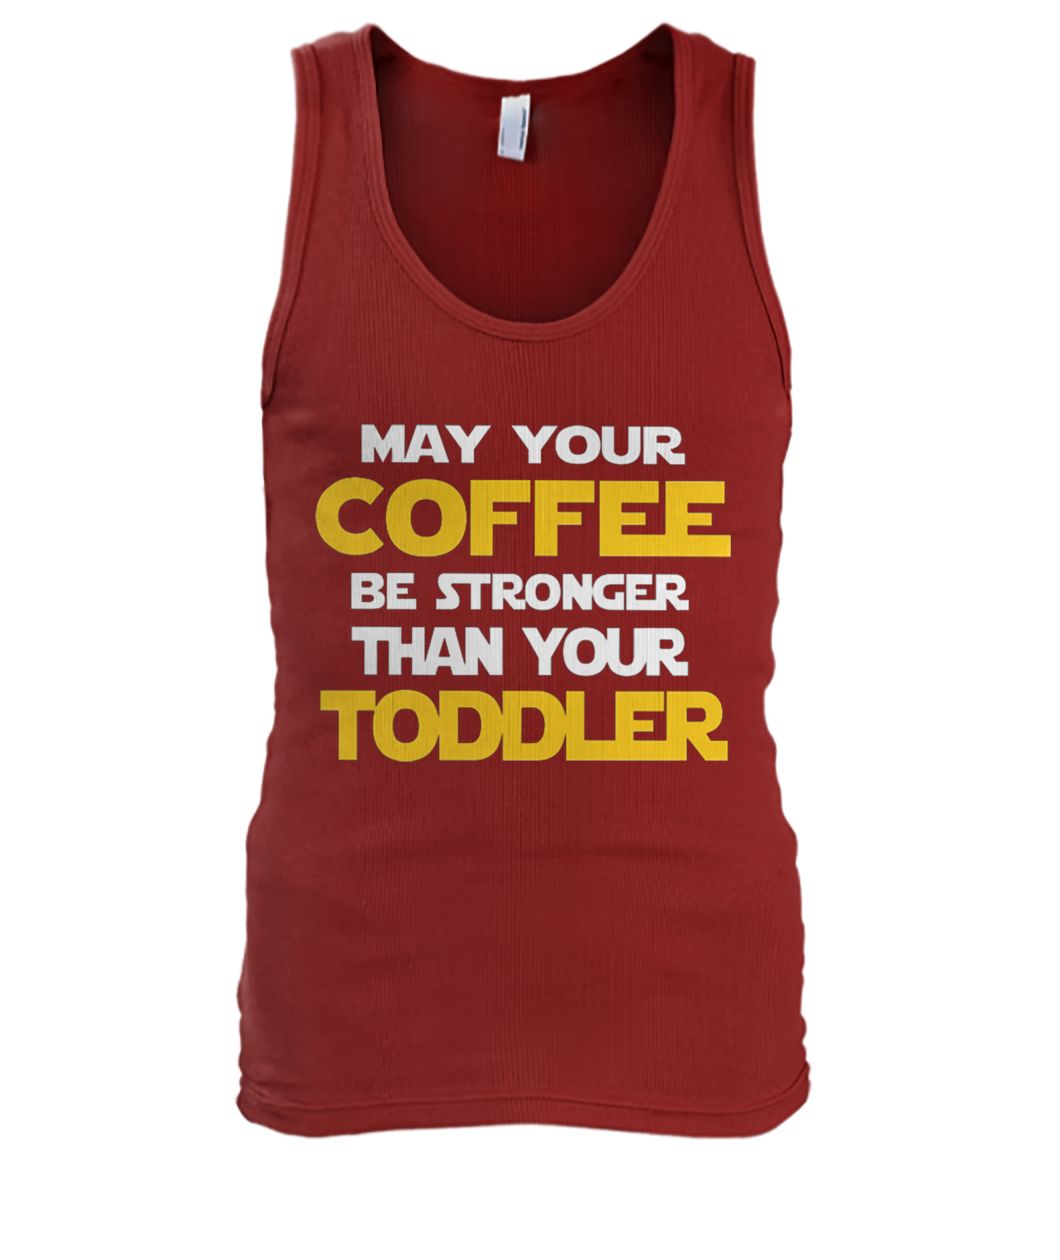 May your coffee be stronger than your toddler men's tank top